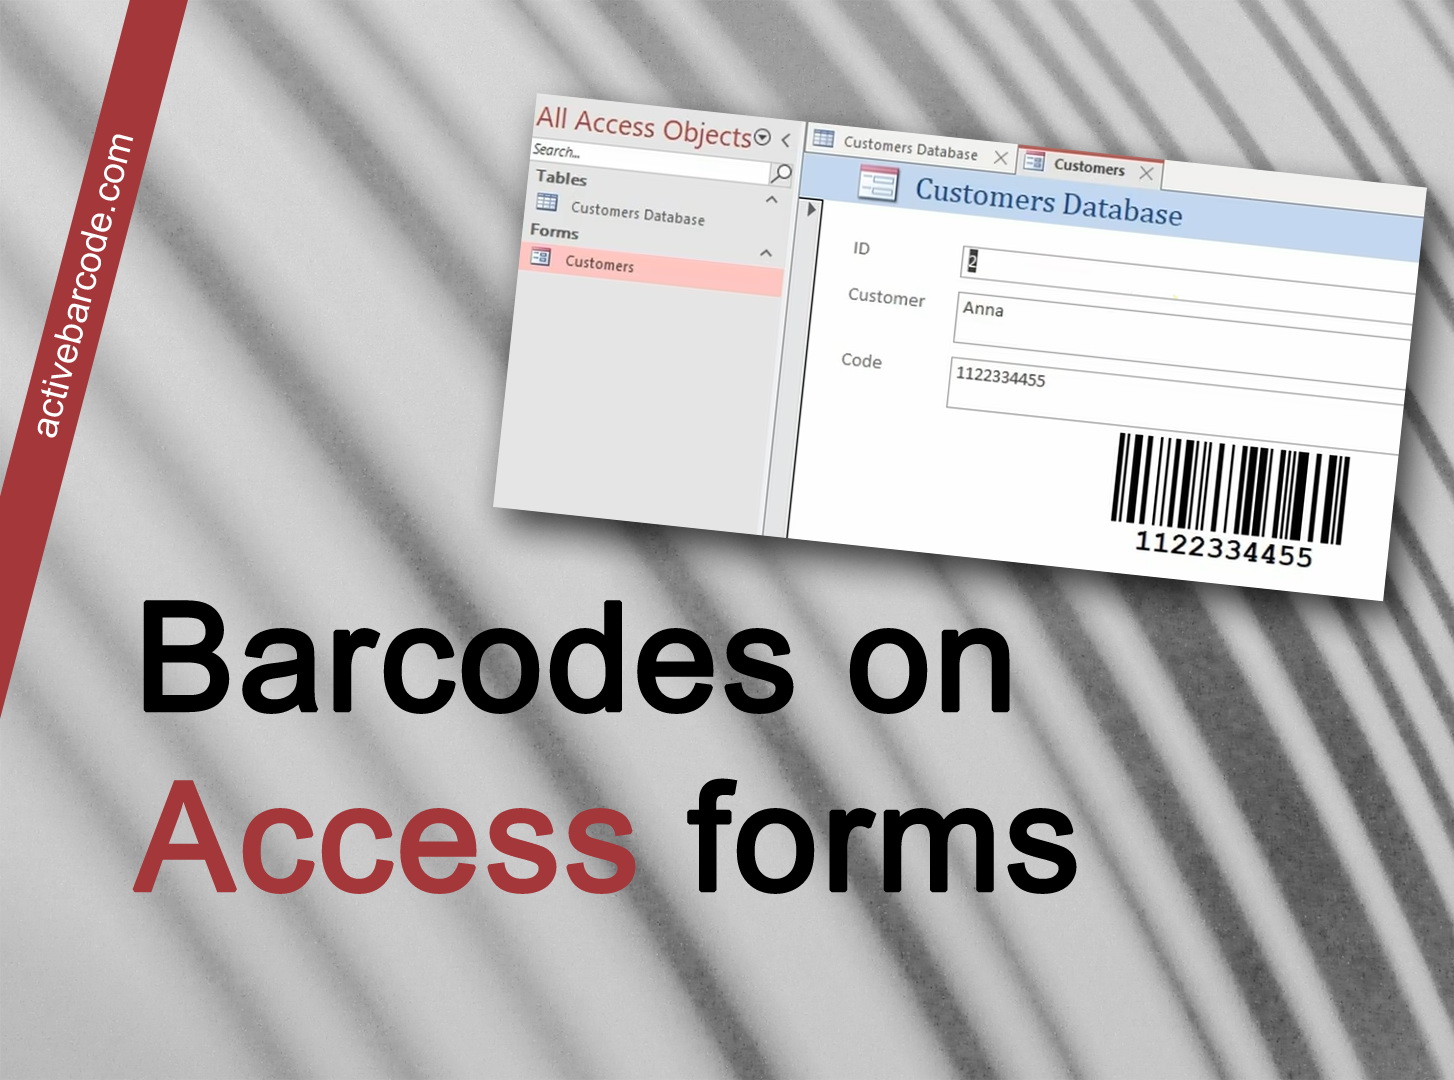 ActiveBarcode: How to add barcodes to a form.